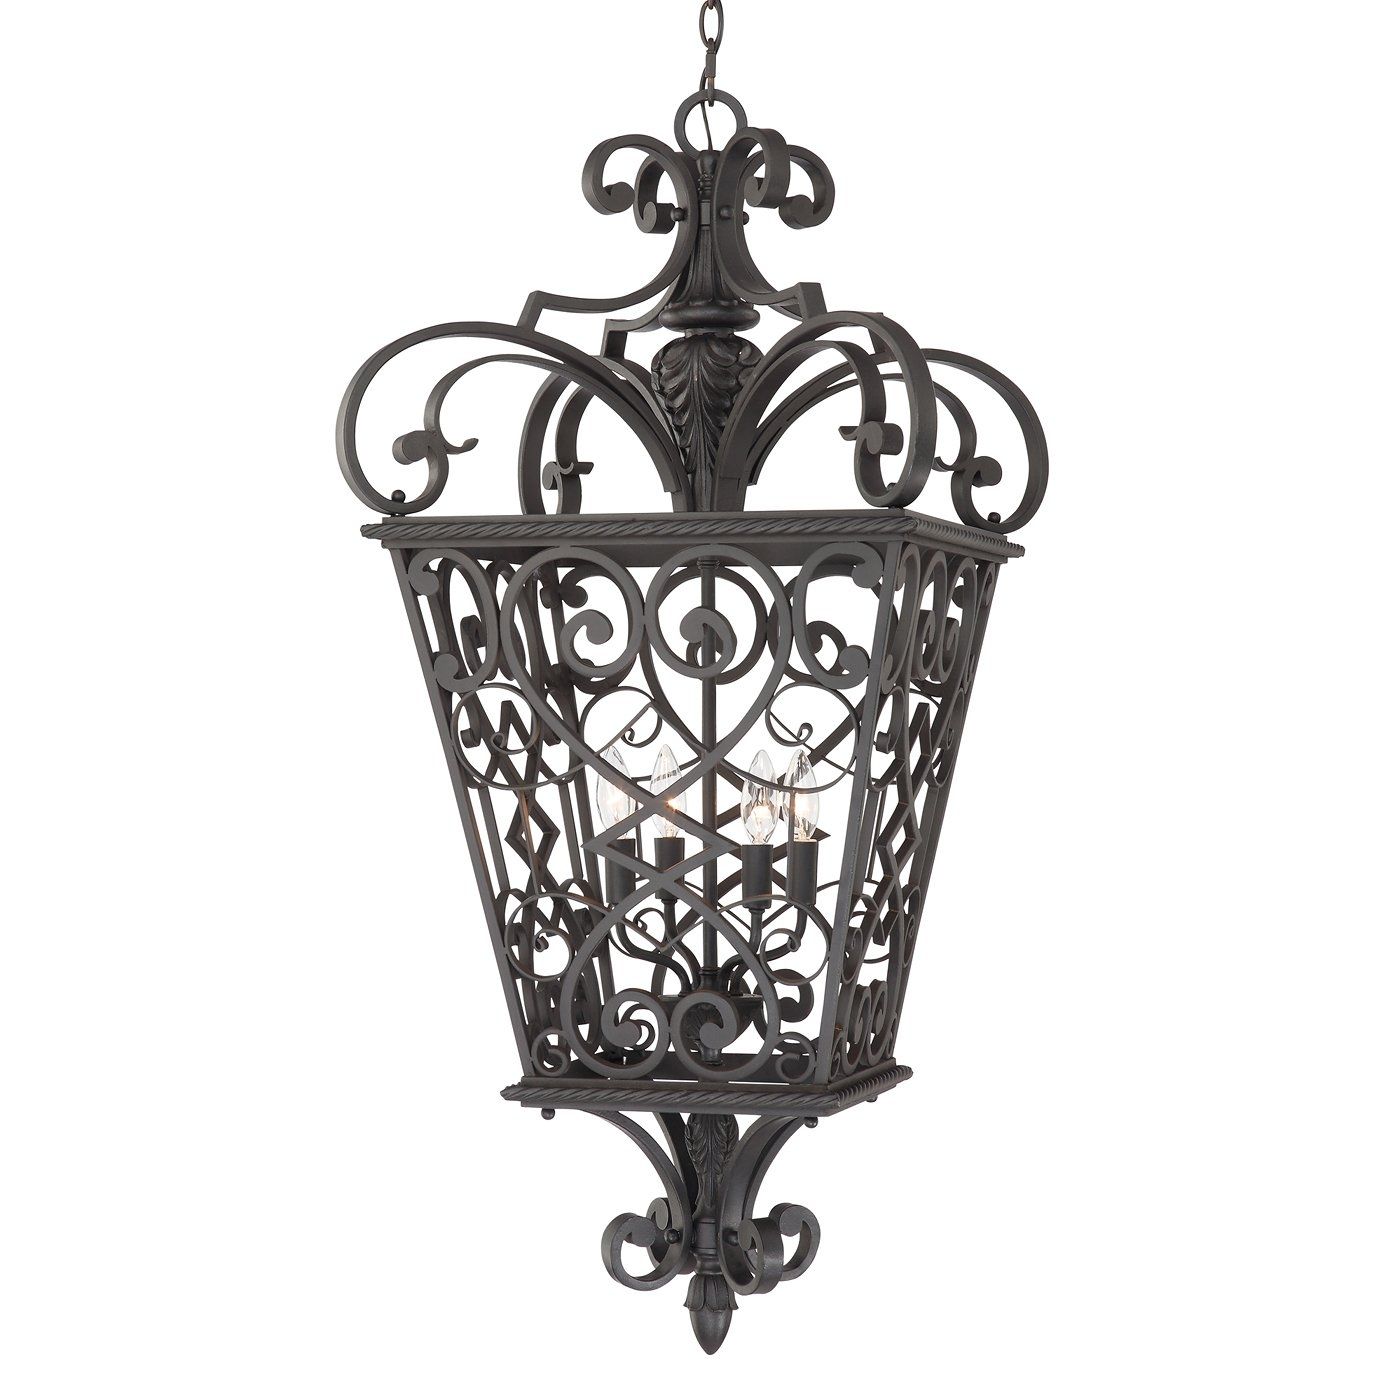 Quoizel Fq1920mk01 4 Light Fort Quinn Extra Large Hanging Outdoor Pertaining To Quoizel Outdoor Hanging Lights (View 15 of 15)